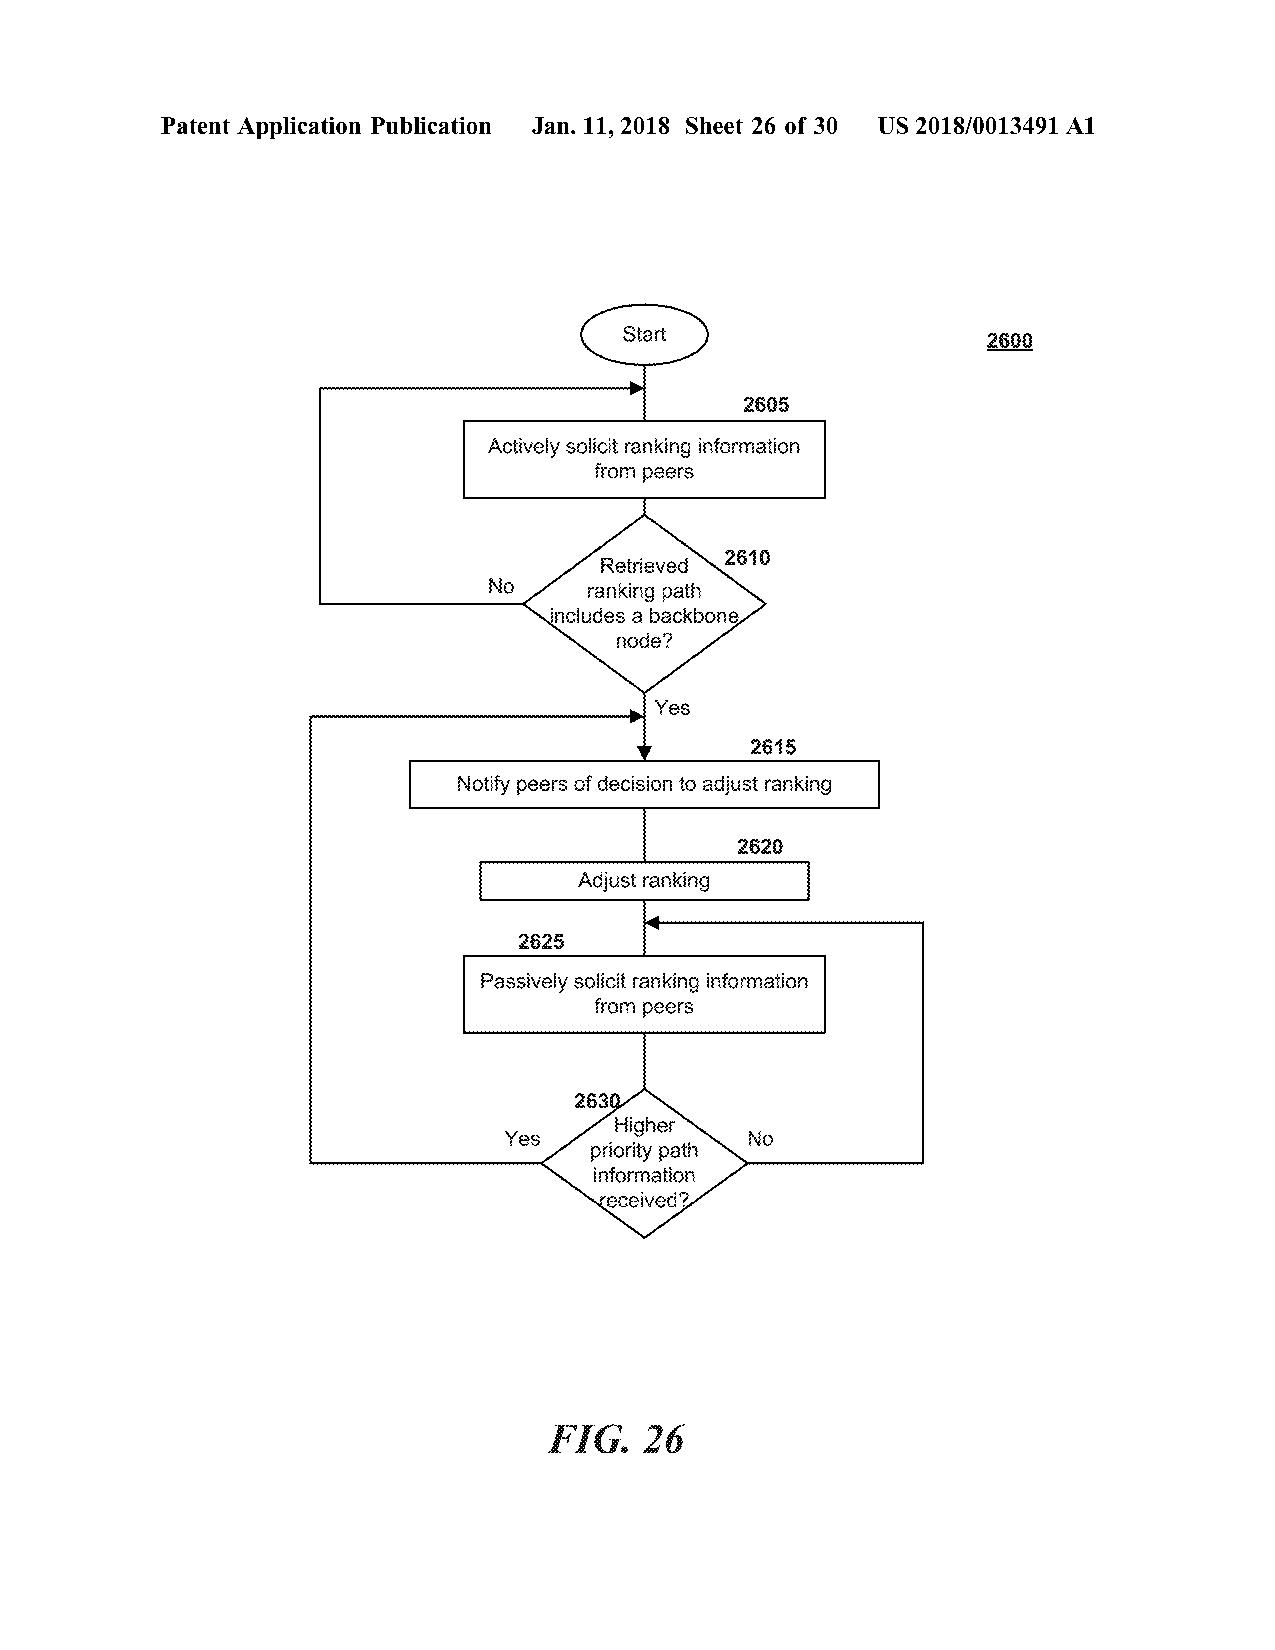 US20180013491A1 DEPLOYING LINE-OF-SIGHT COMMUNICATION NETWORK